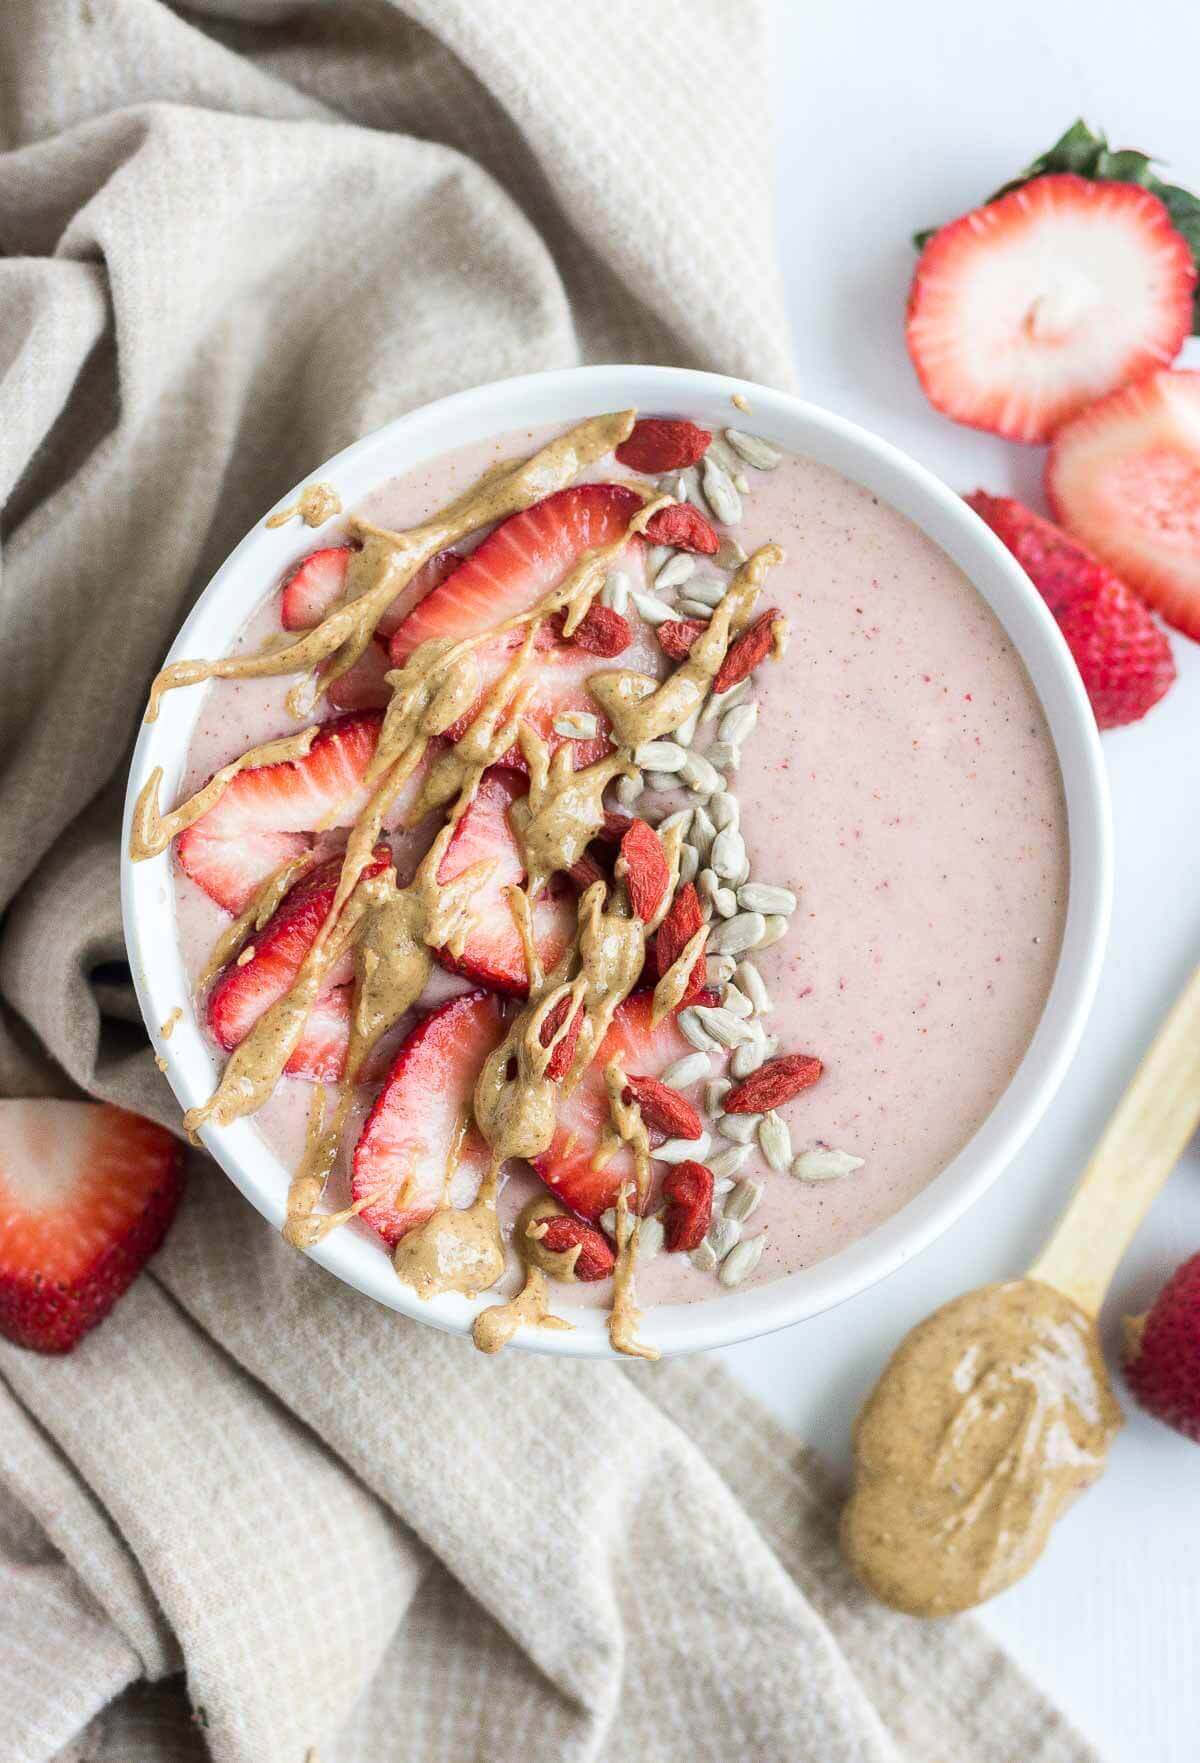 This PB & J Smoothie Bowl is made with fresh, raw ingredients and the perfect recipe to start your morning. The "jelly" comes from the strawberries and the "PB" comes from all natural almond butter! This sweet and satisfying healthy smoothie bowl will become your next go-to.